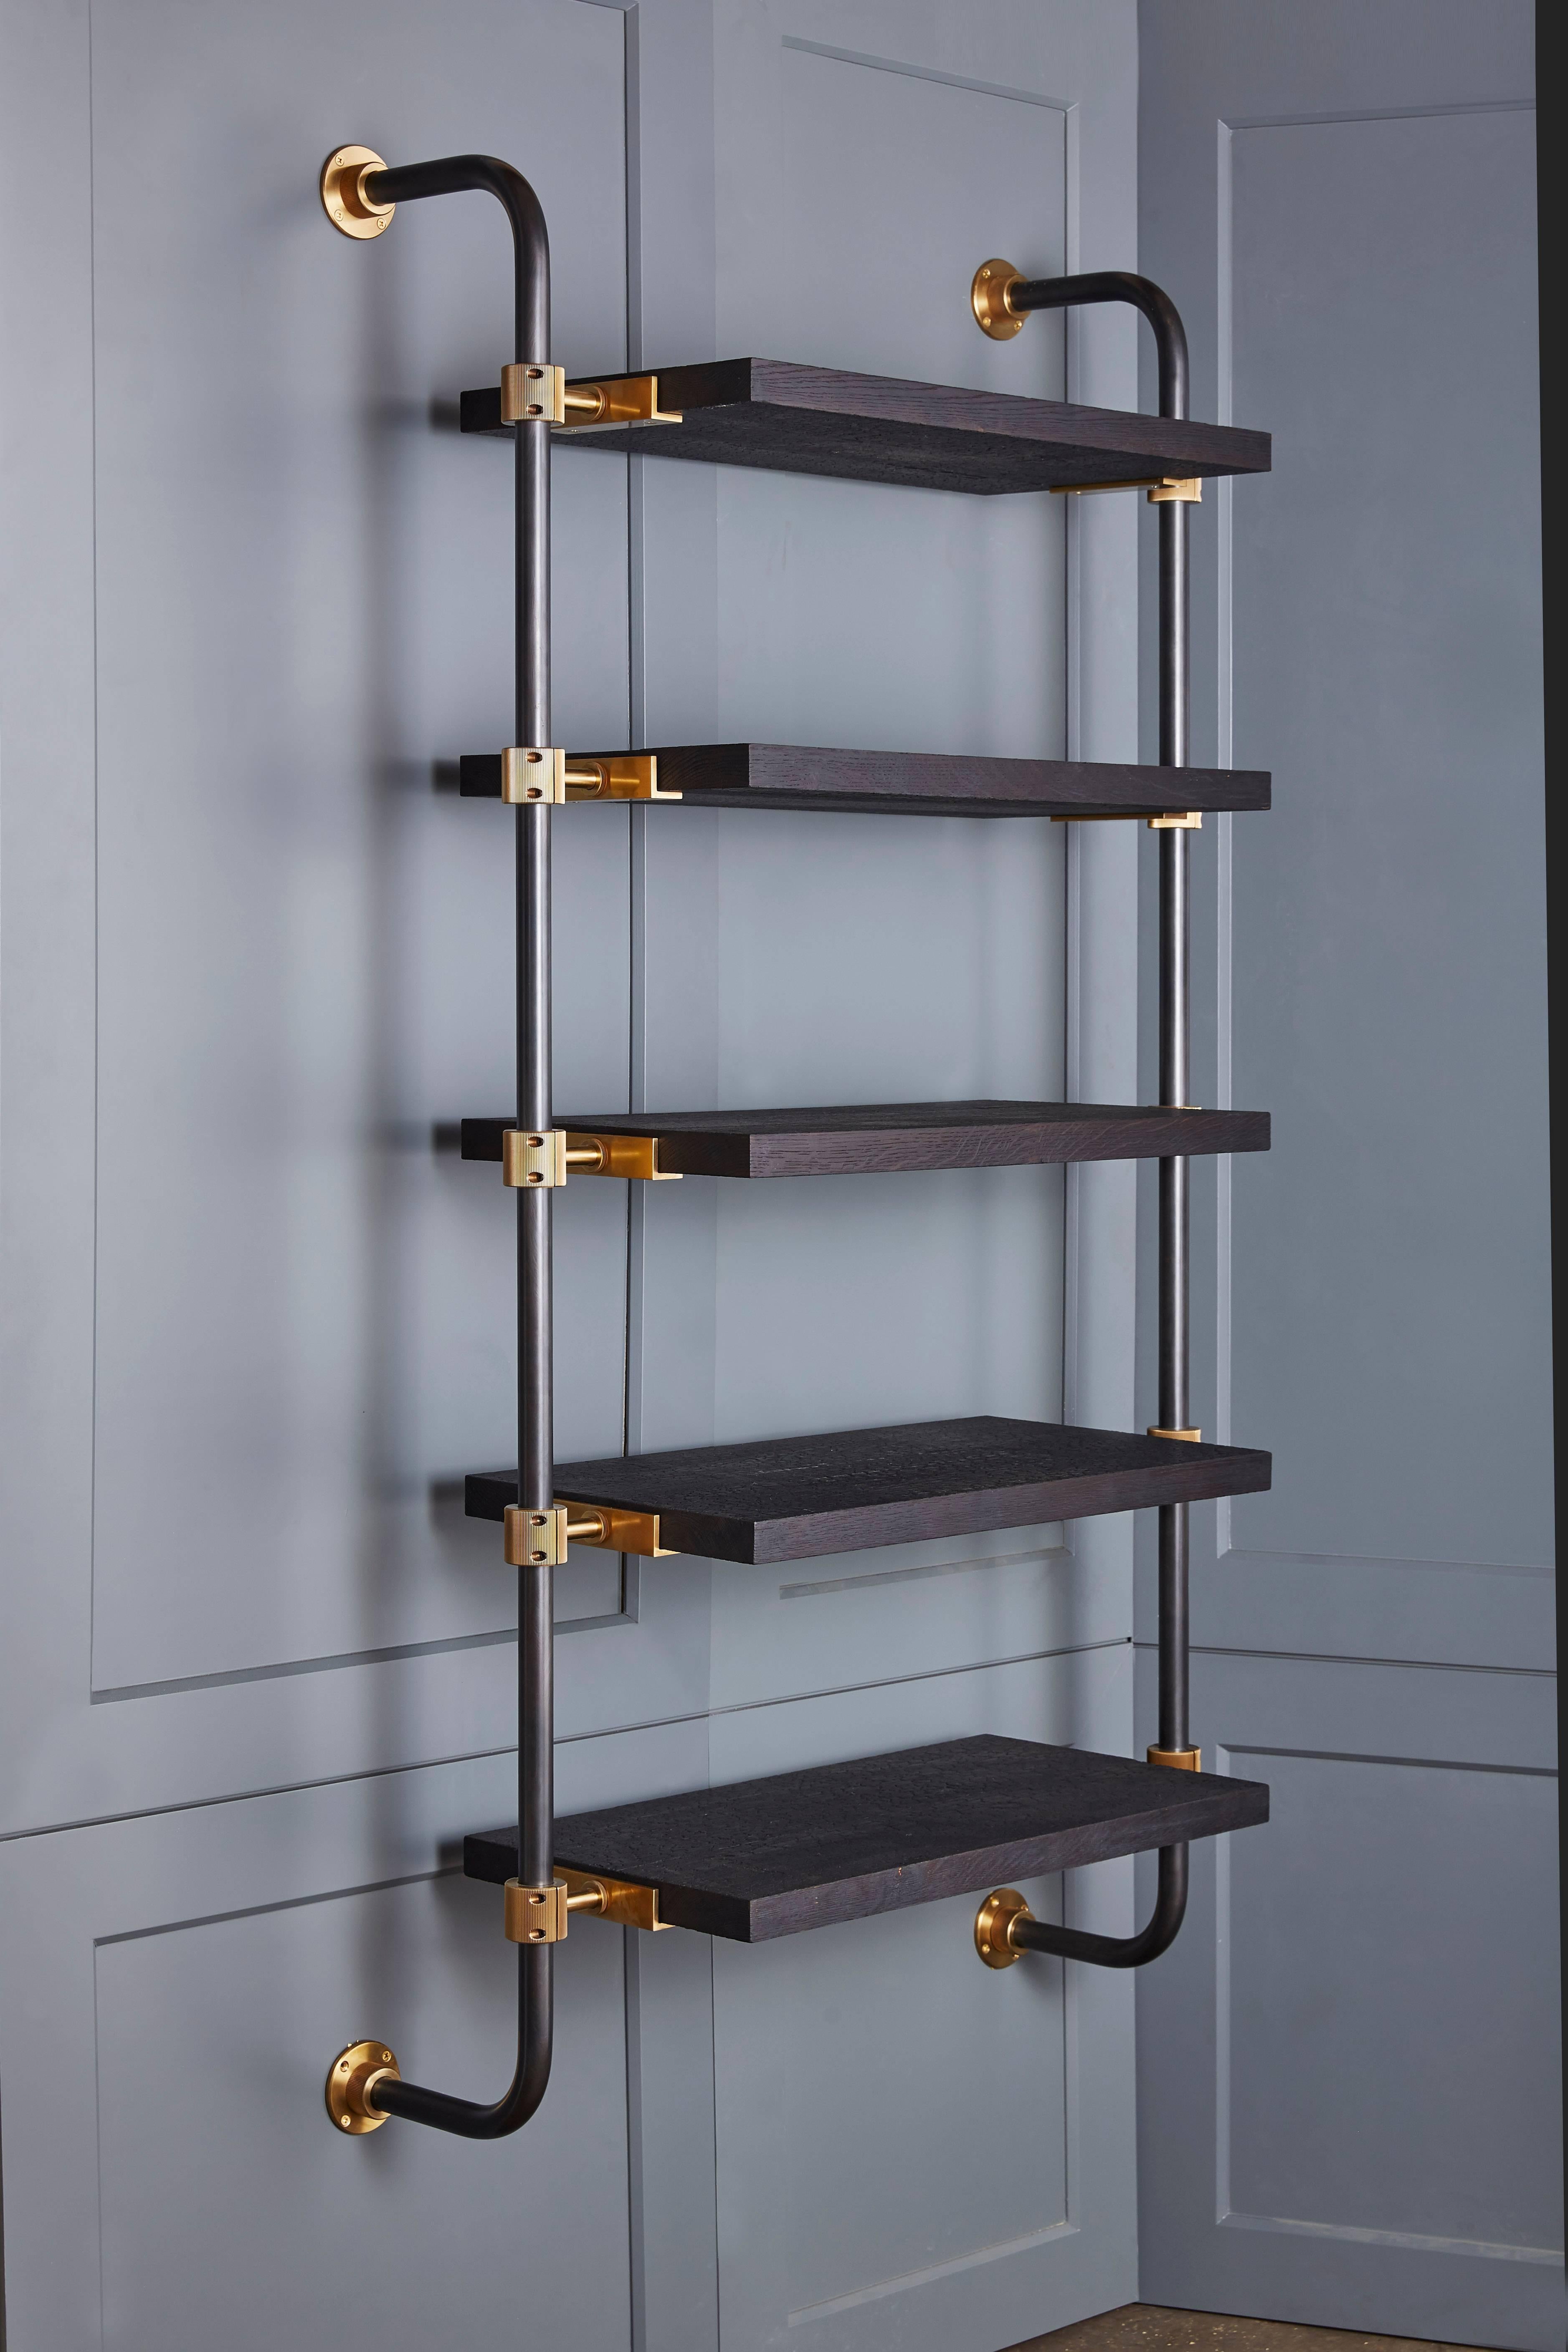 This single bay of our Loft Shelving is wall-mounted to support five shelves, using custom machined brass fittings on bent steel posts. Amuneal’s proprietary machined hardware clamps onto the posts so that the shelves can be easily adjusted at any